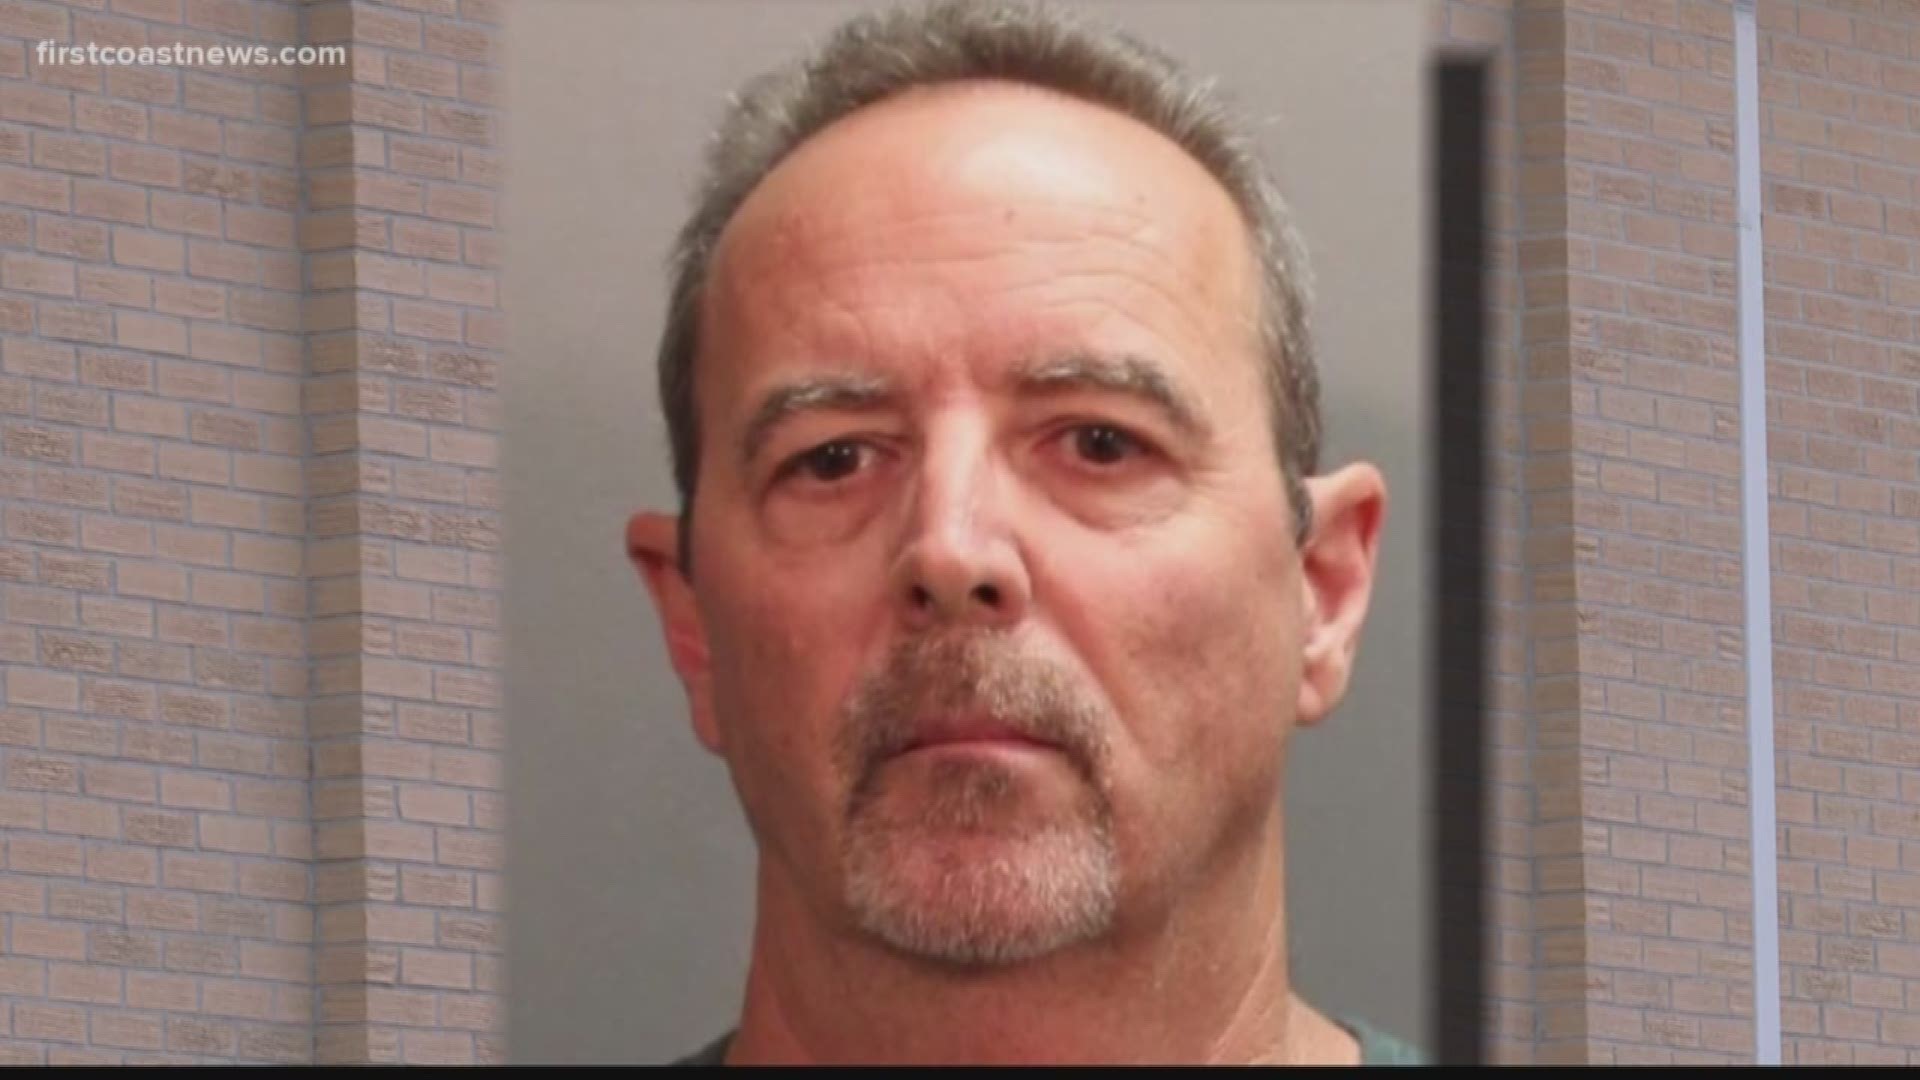 A 59-year-old man has been arrested and charged with numerous charges after he allegedly engaged in a sex act with a child in a Jacksonville church.